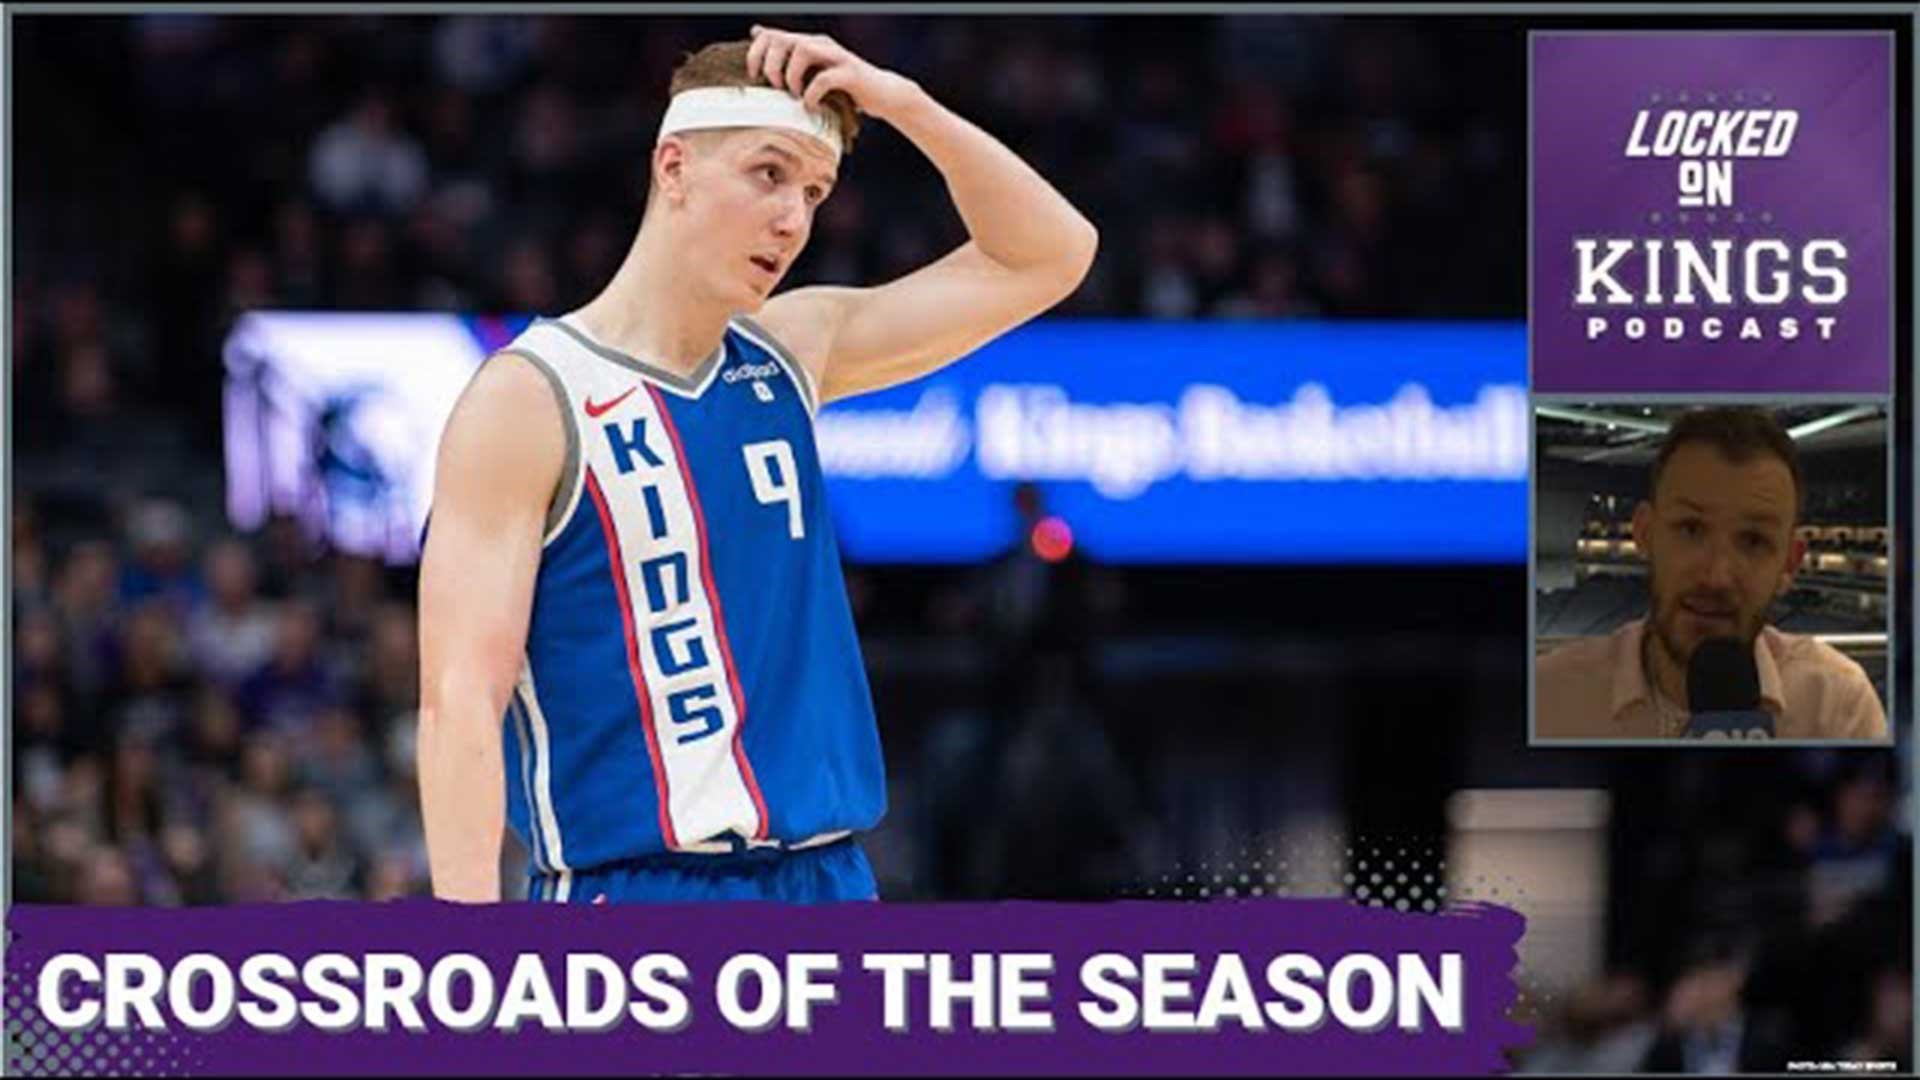 Matt George breaks down the Sacramento Kings' fourth straight loss, this time at home to a shorthanded Indiana Pacers team.